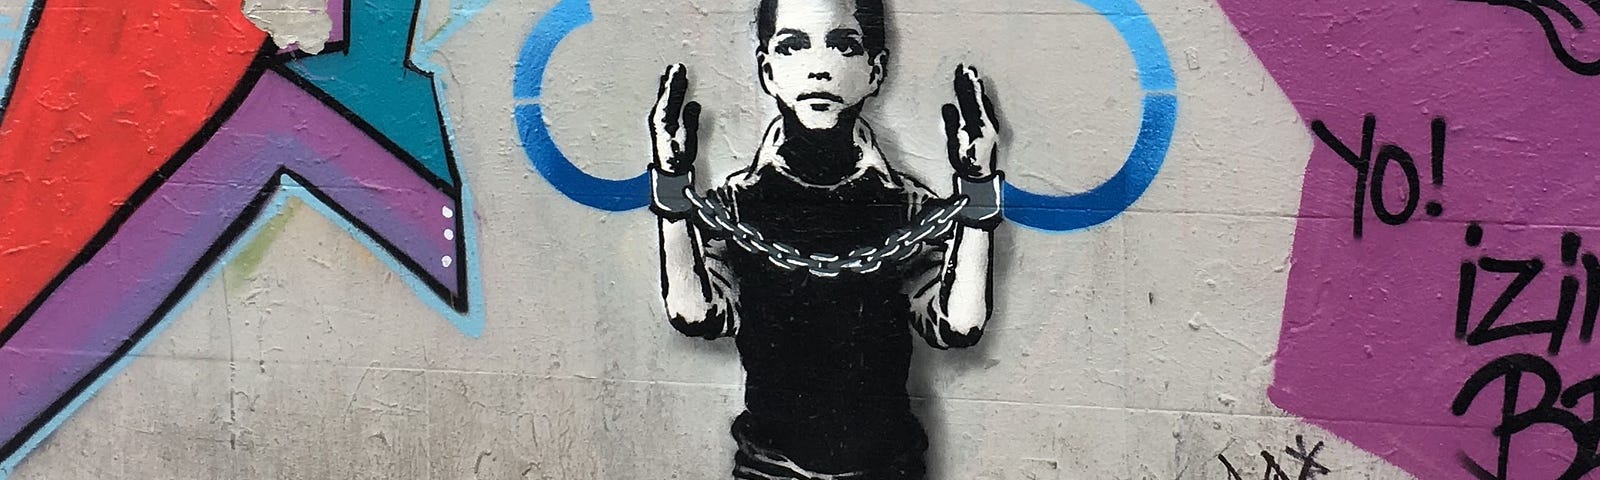 Graffiti of a boy with his hands raised in handcuffs and a cloud outline encircling his head representing ideas.